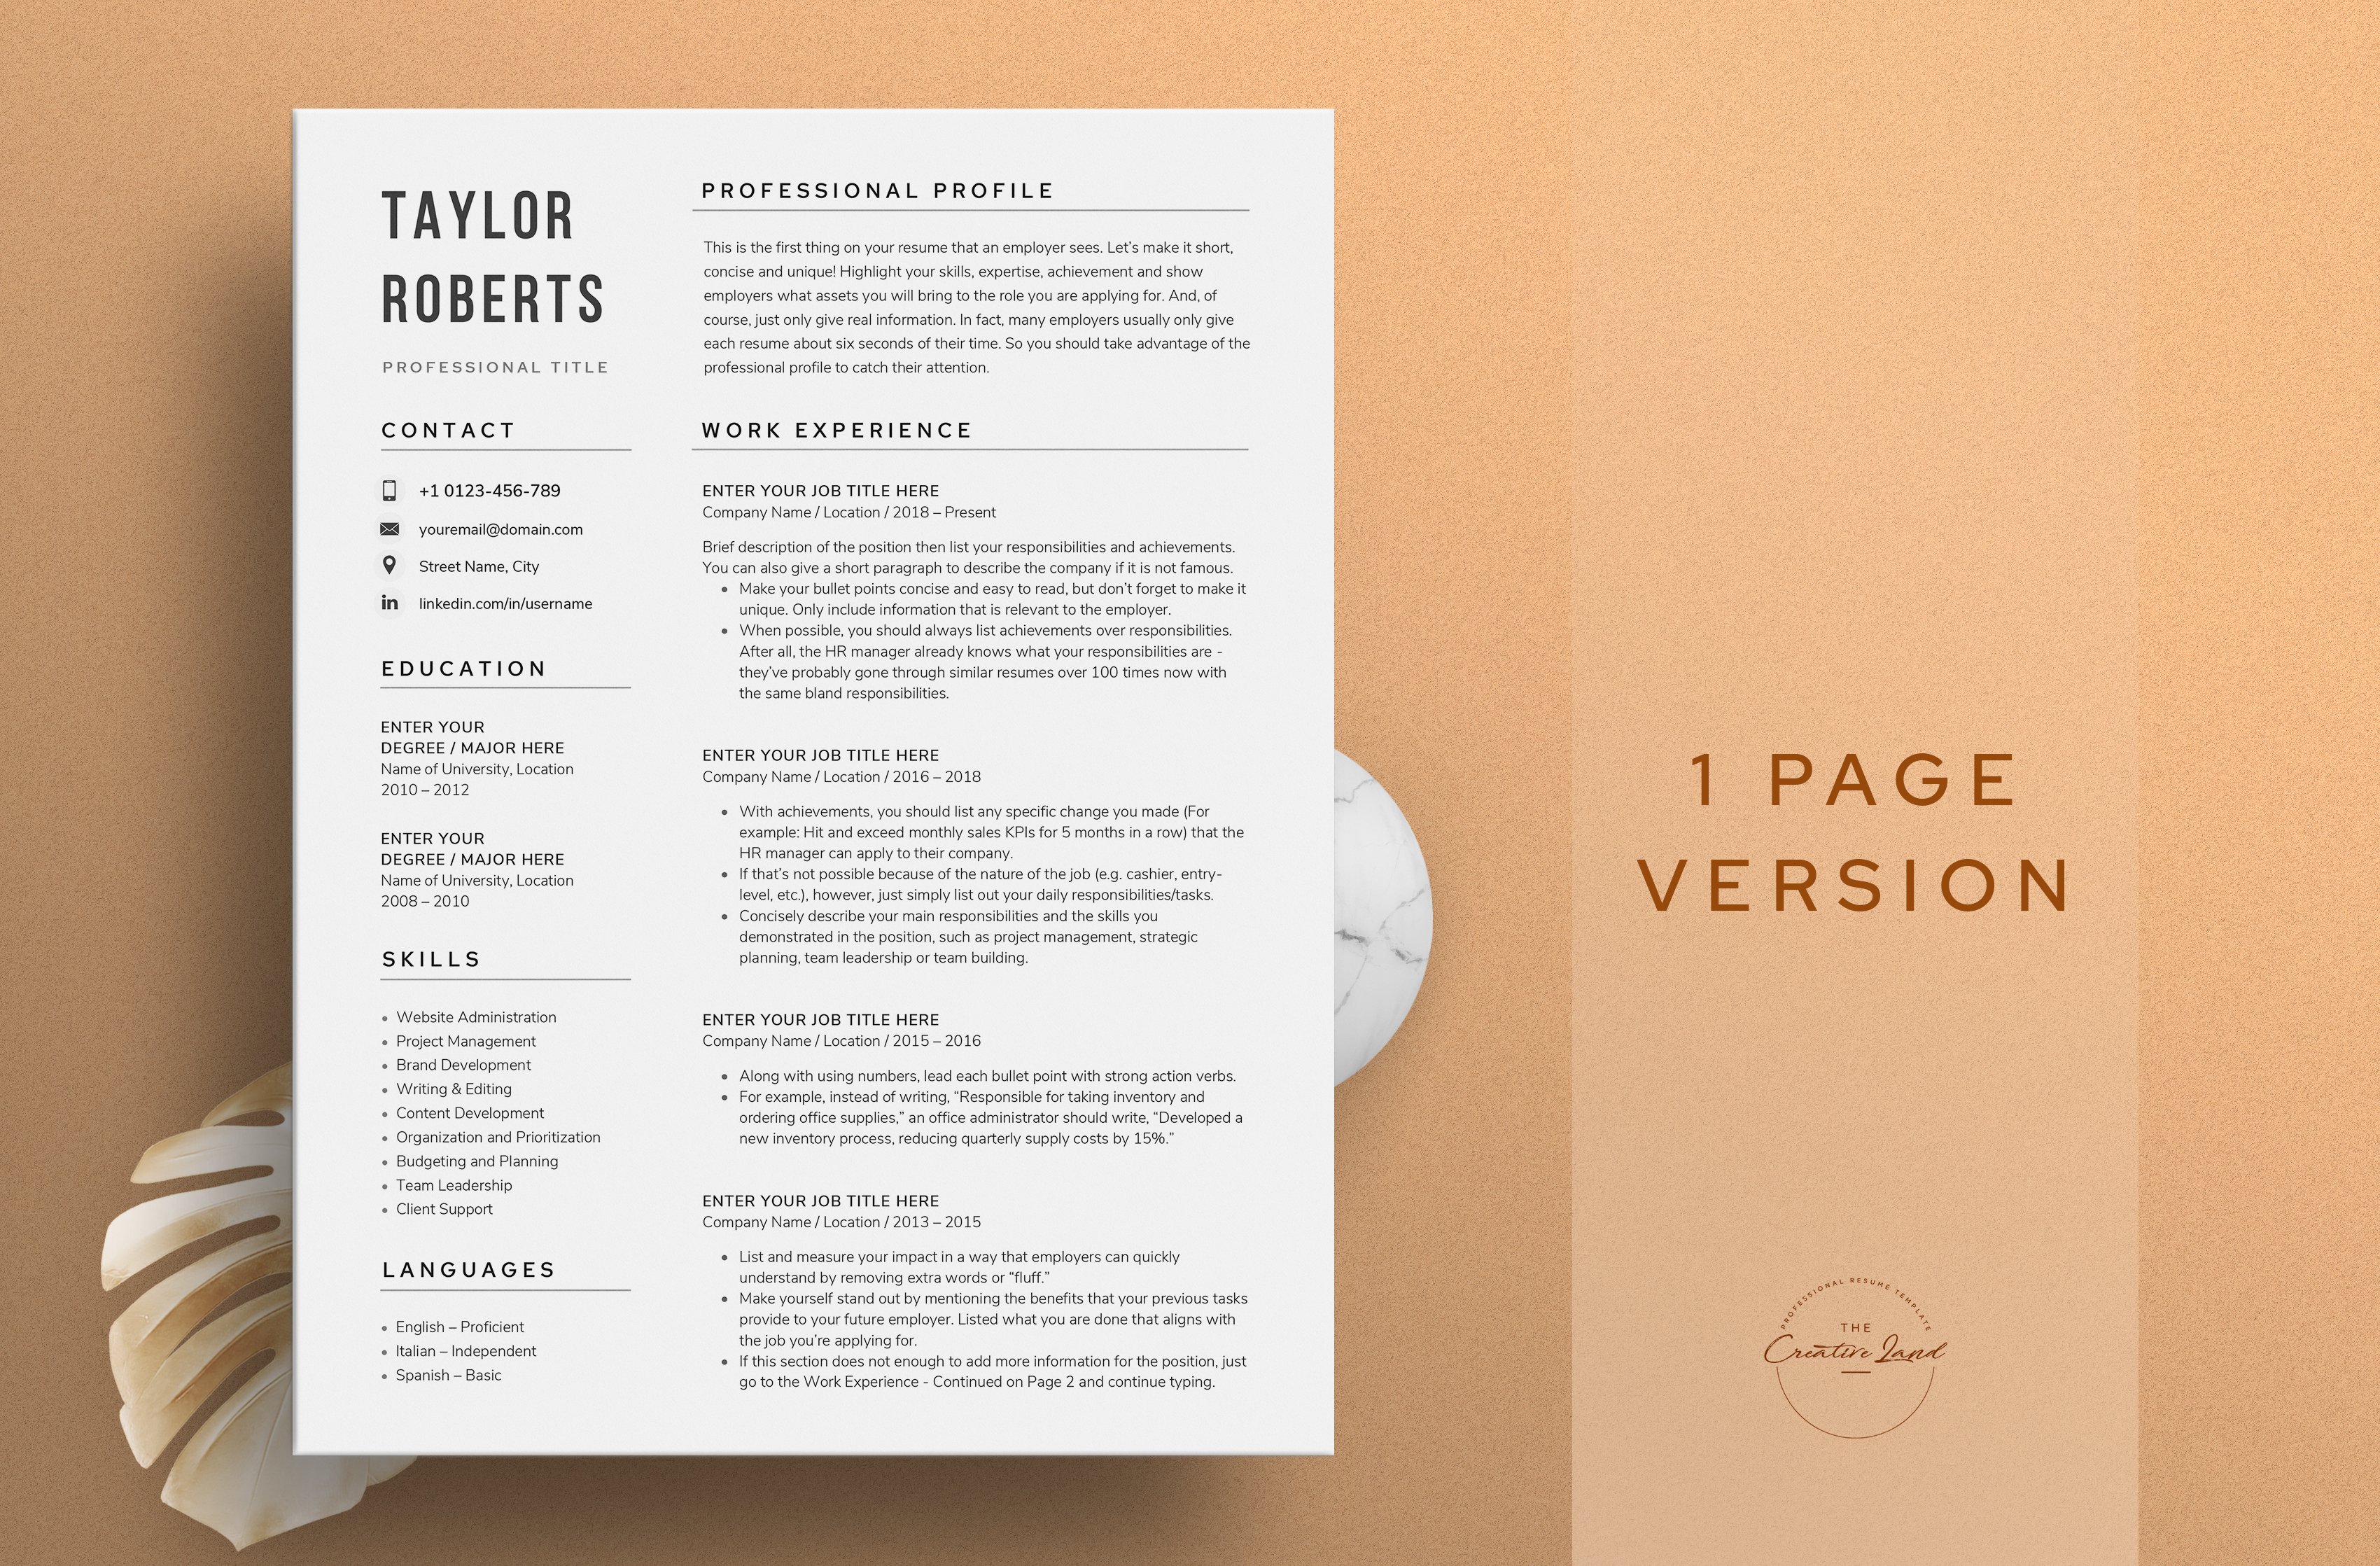 Resume/CV - The Taylor preview image.